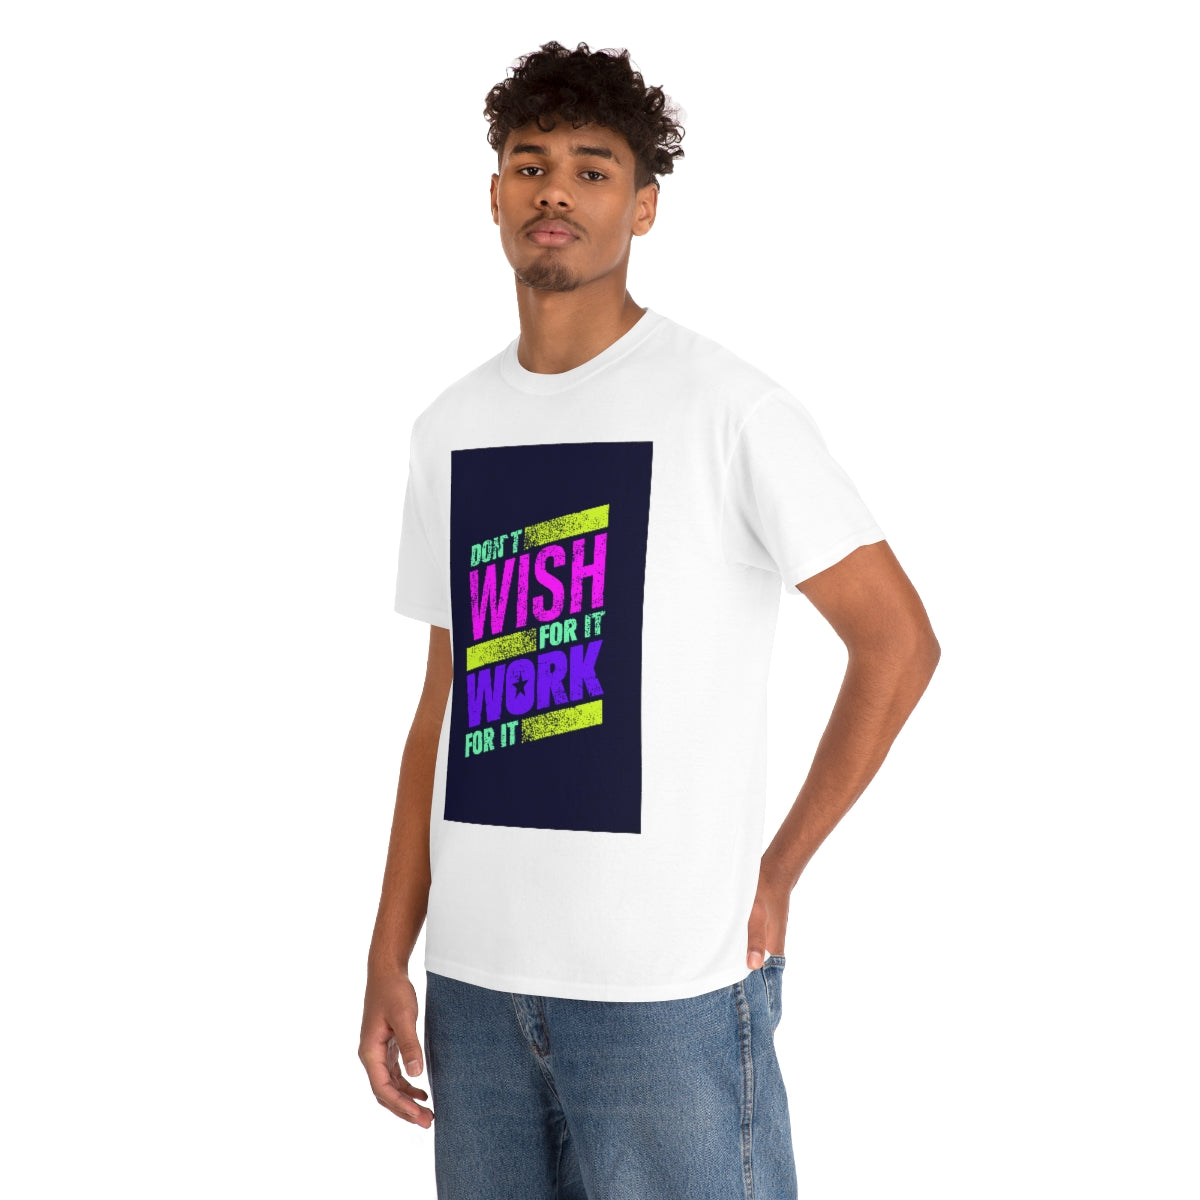 Don't Wish for It, Work for It Shirt